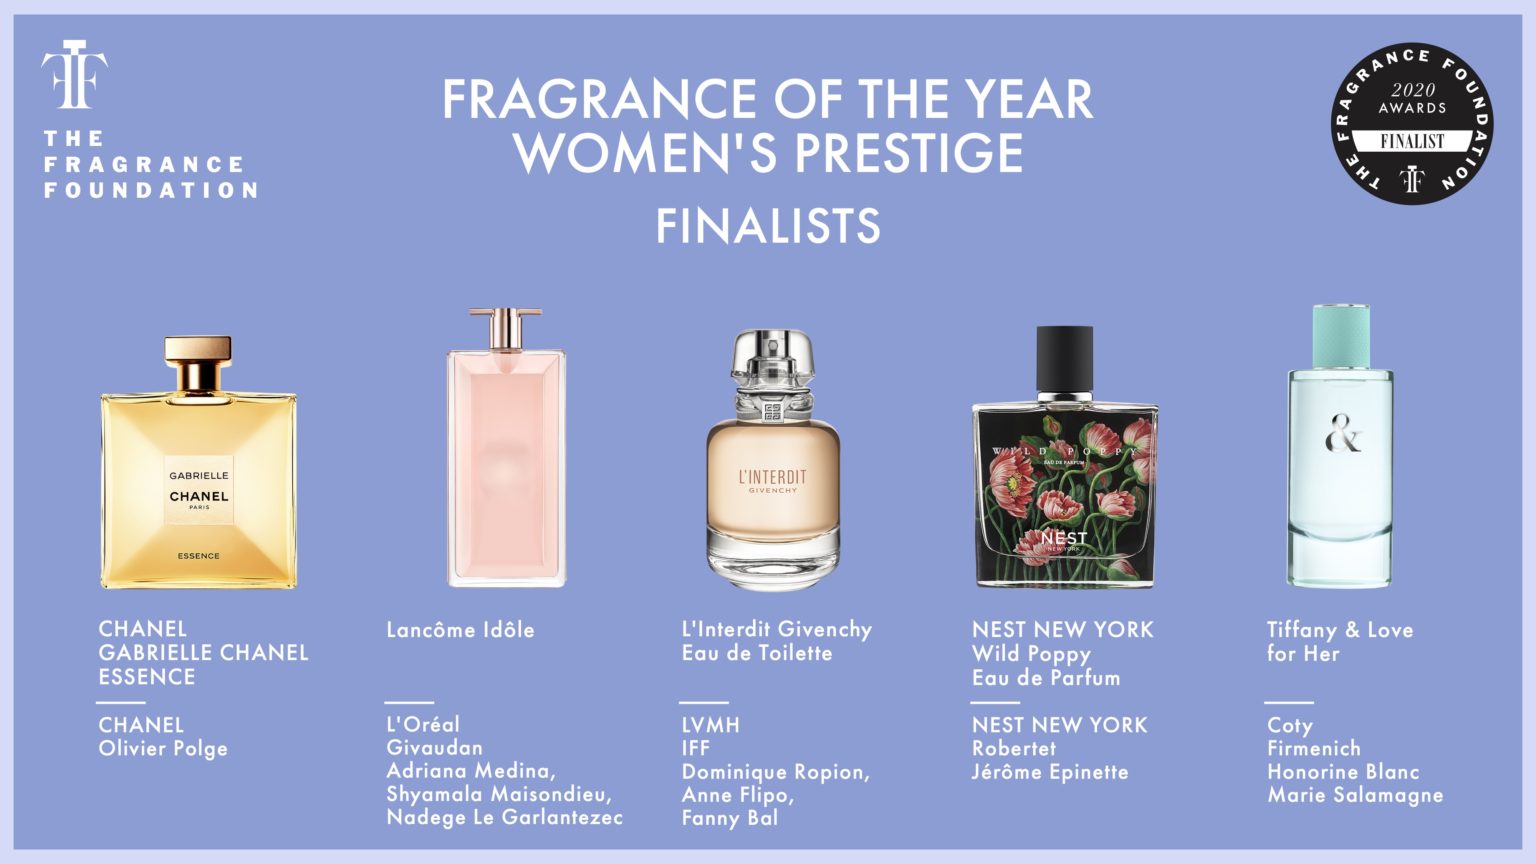 THE 2020 AWARDS FINALISTS ANNOUNCEMENT WEBINAR — The Fragrance Foundation